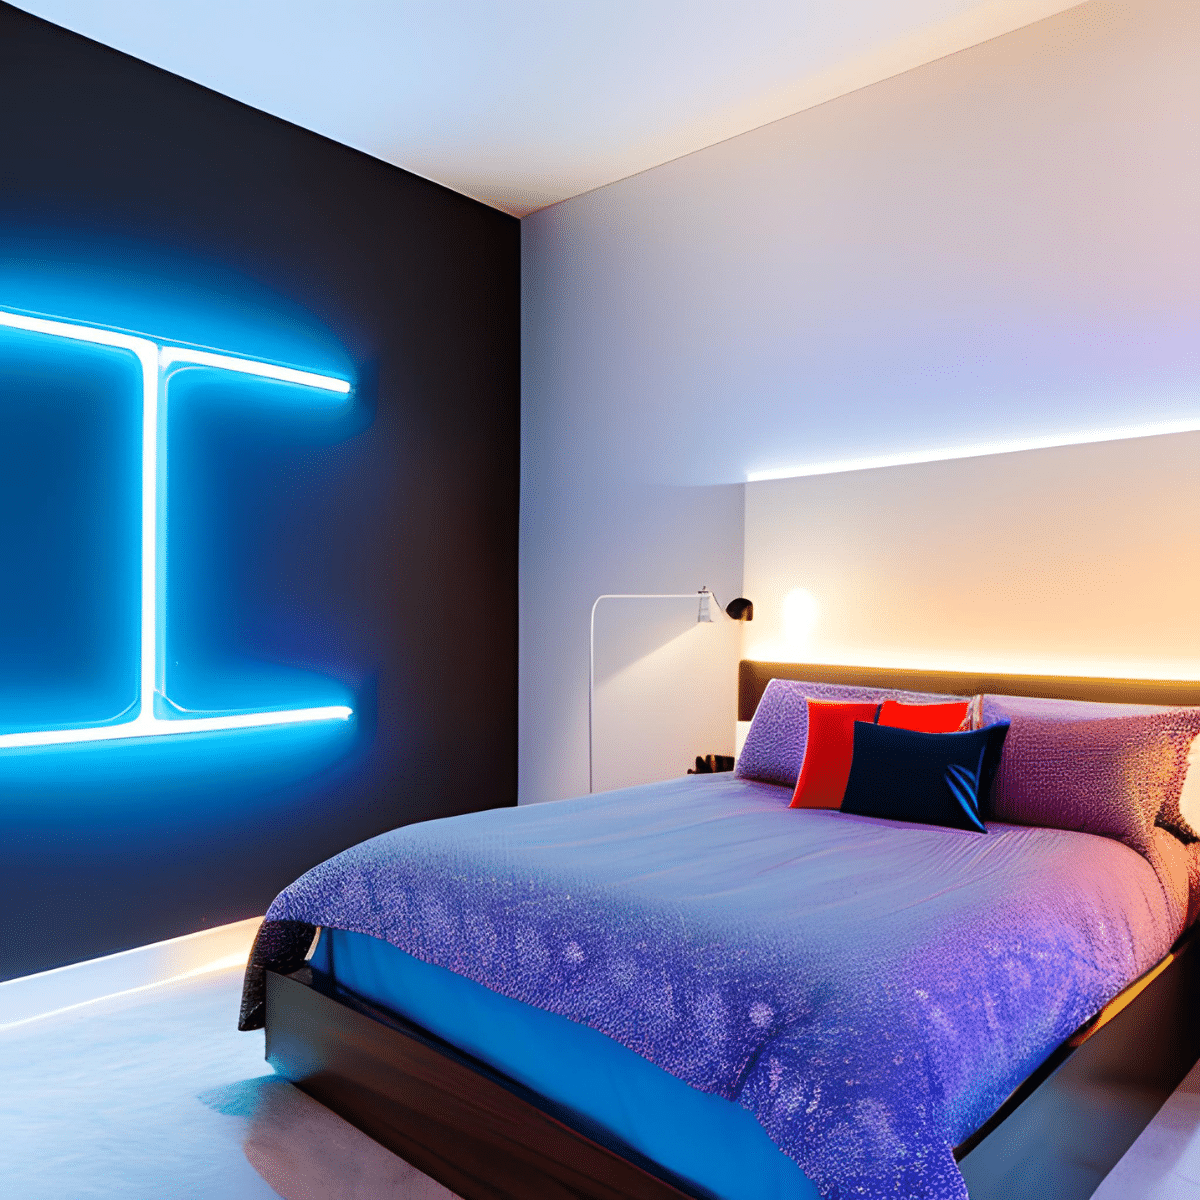 bedroom with a blue neon light feature beside the bed